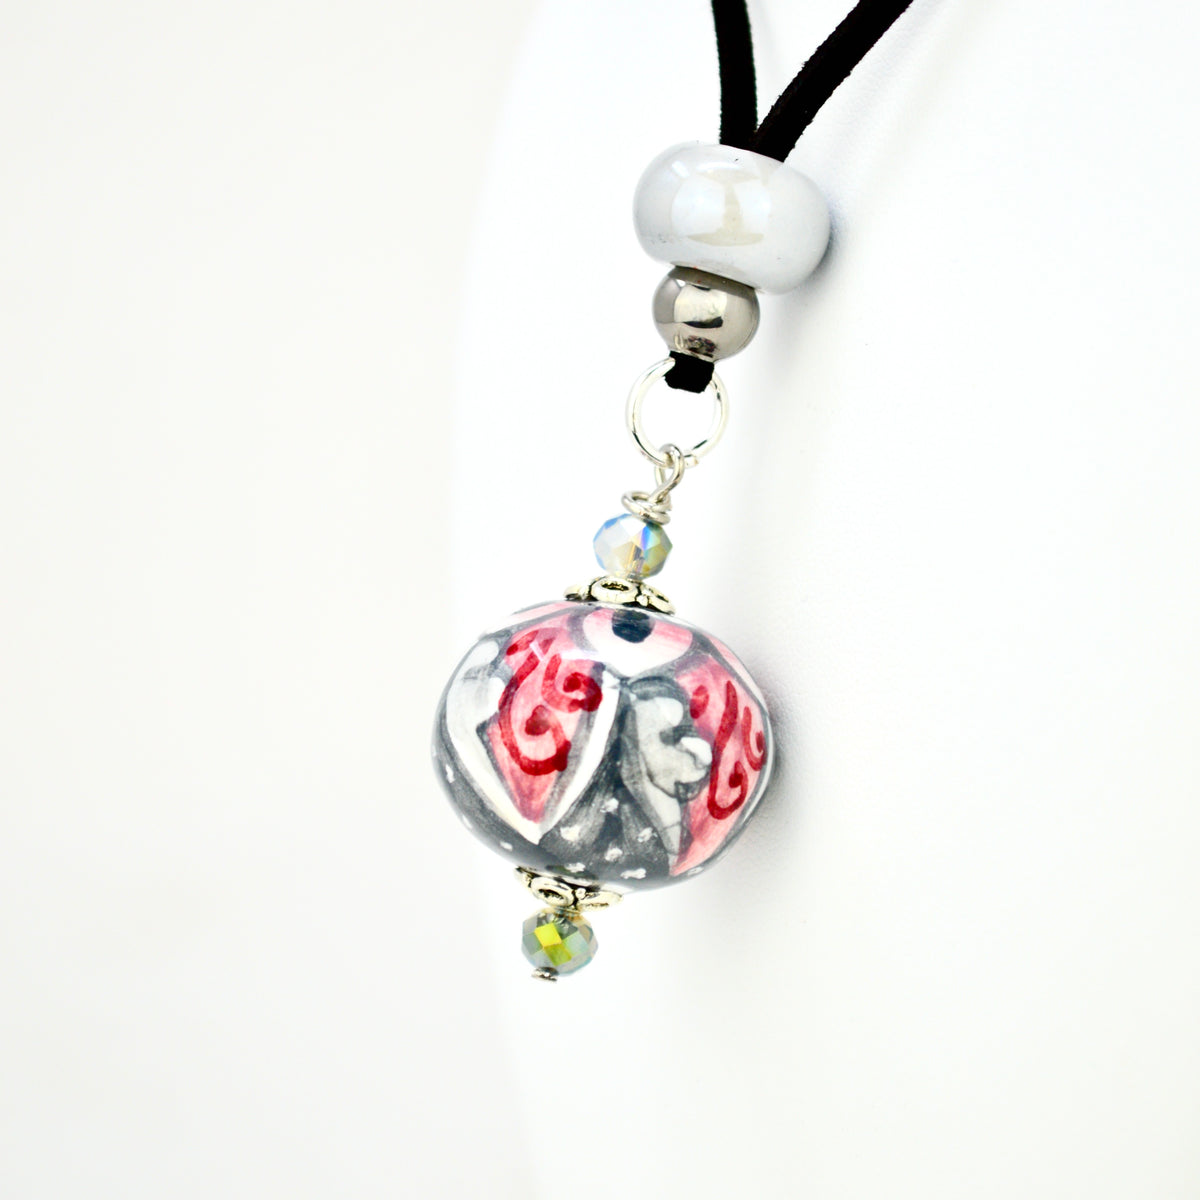 Italian Ceramic Diana Necklace, Red and Grey, Hand-Crafted In Italy - My Italian Decor